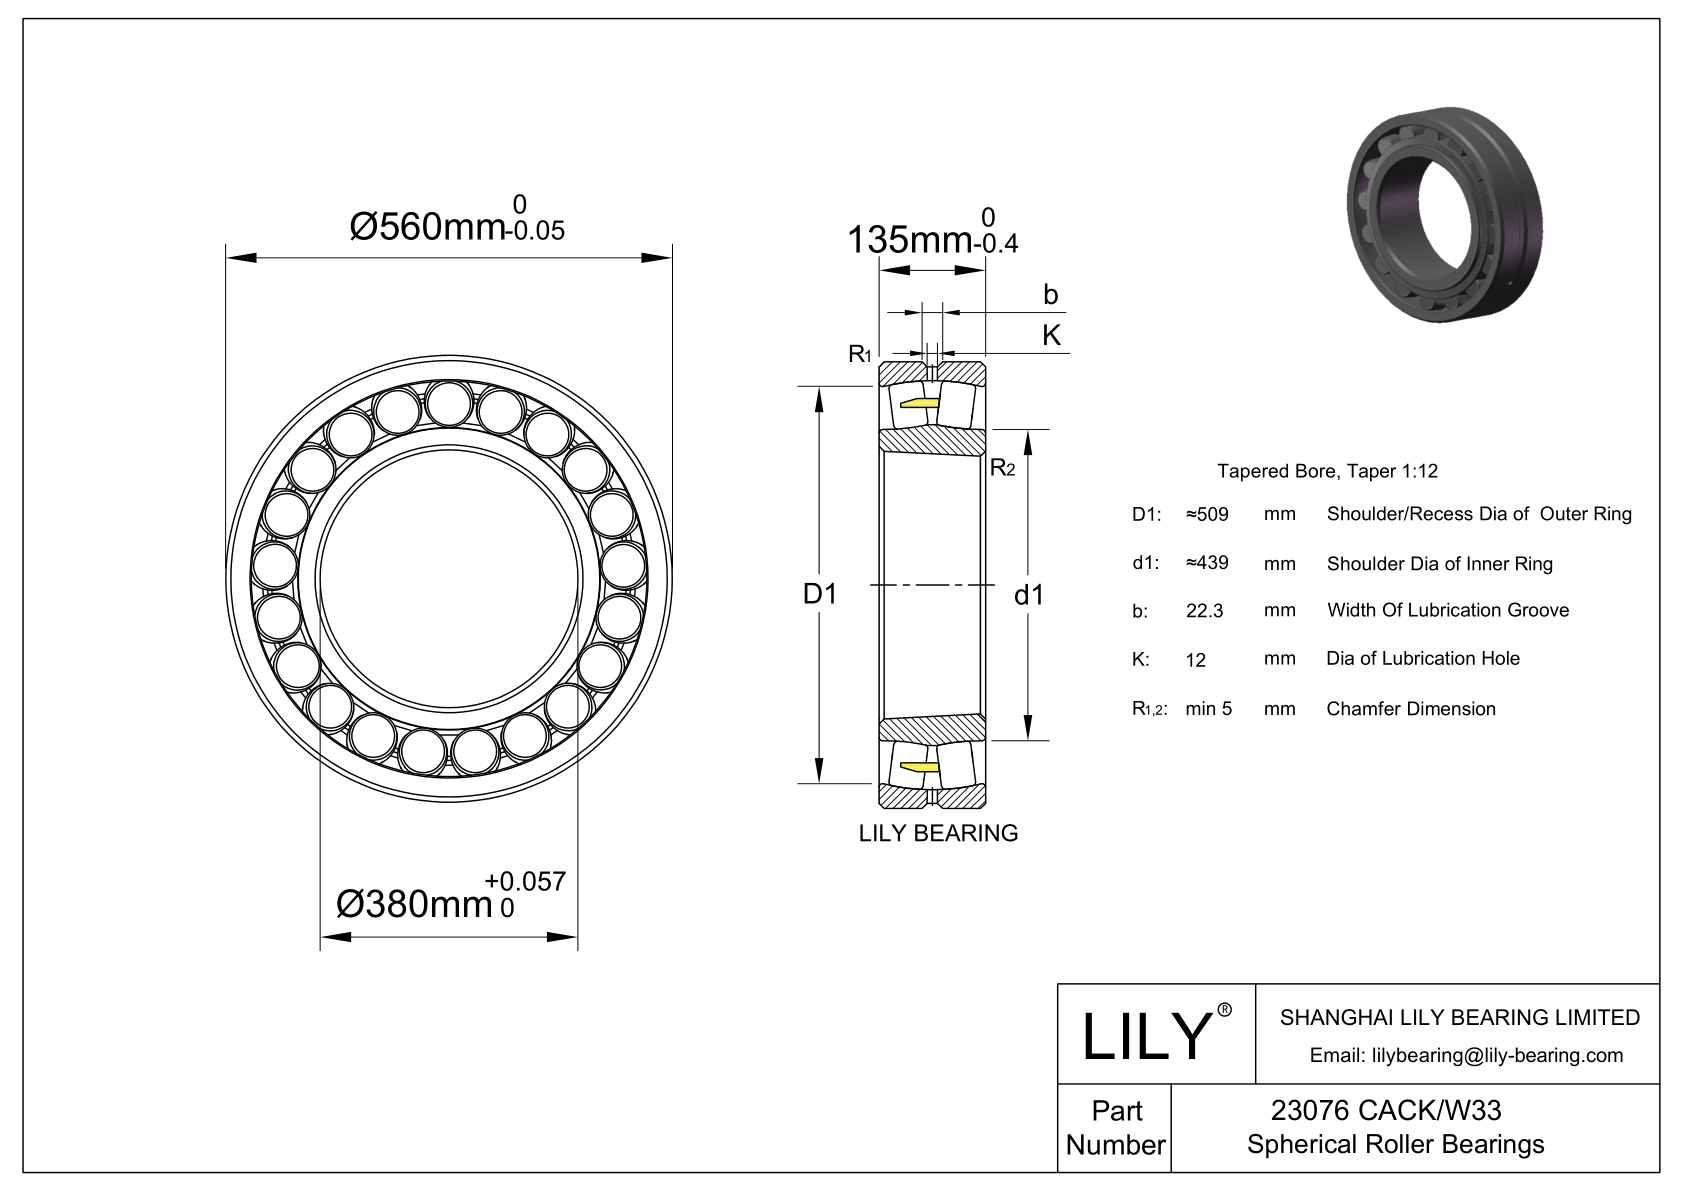 23076 CACK/W33 Double Row Spherical Roller Bearing cad drawing